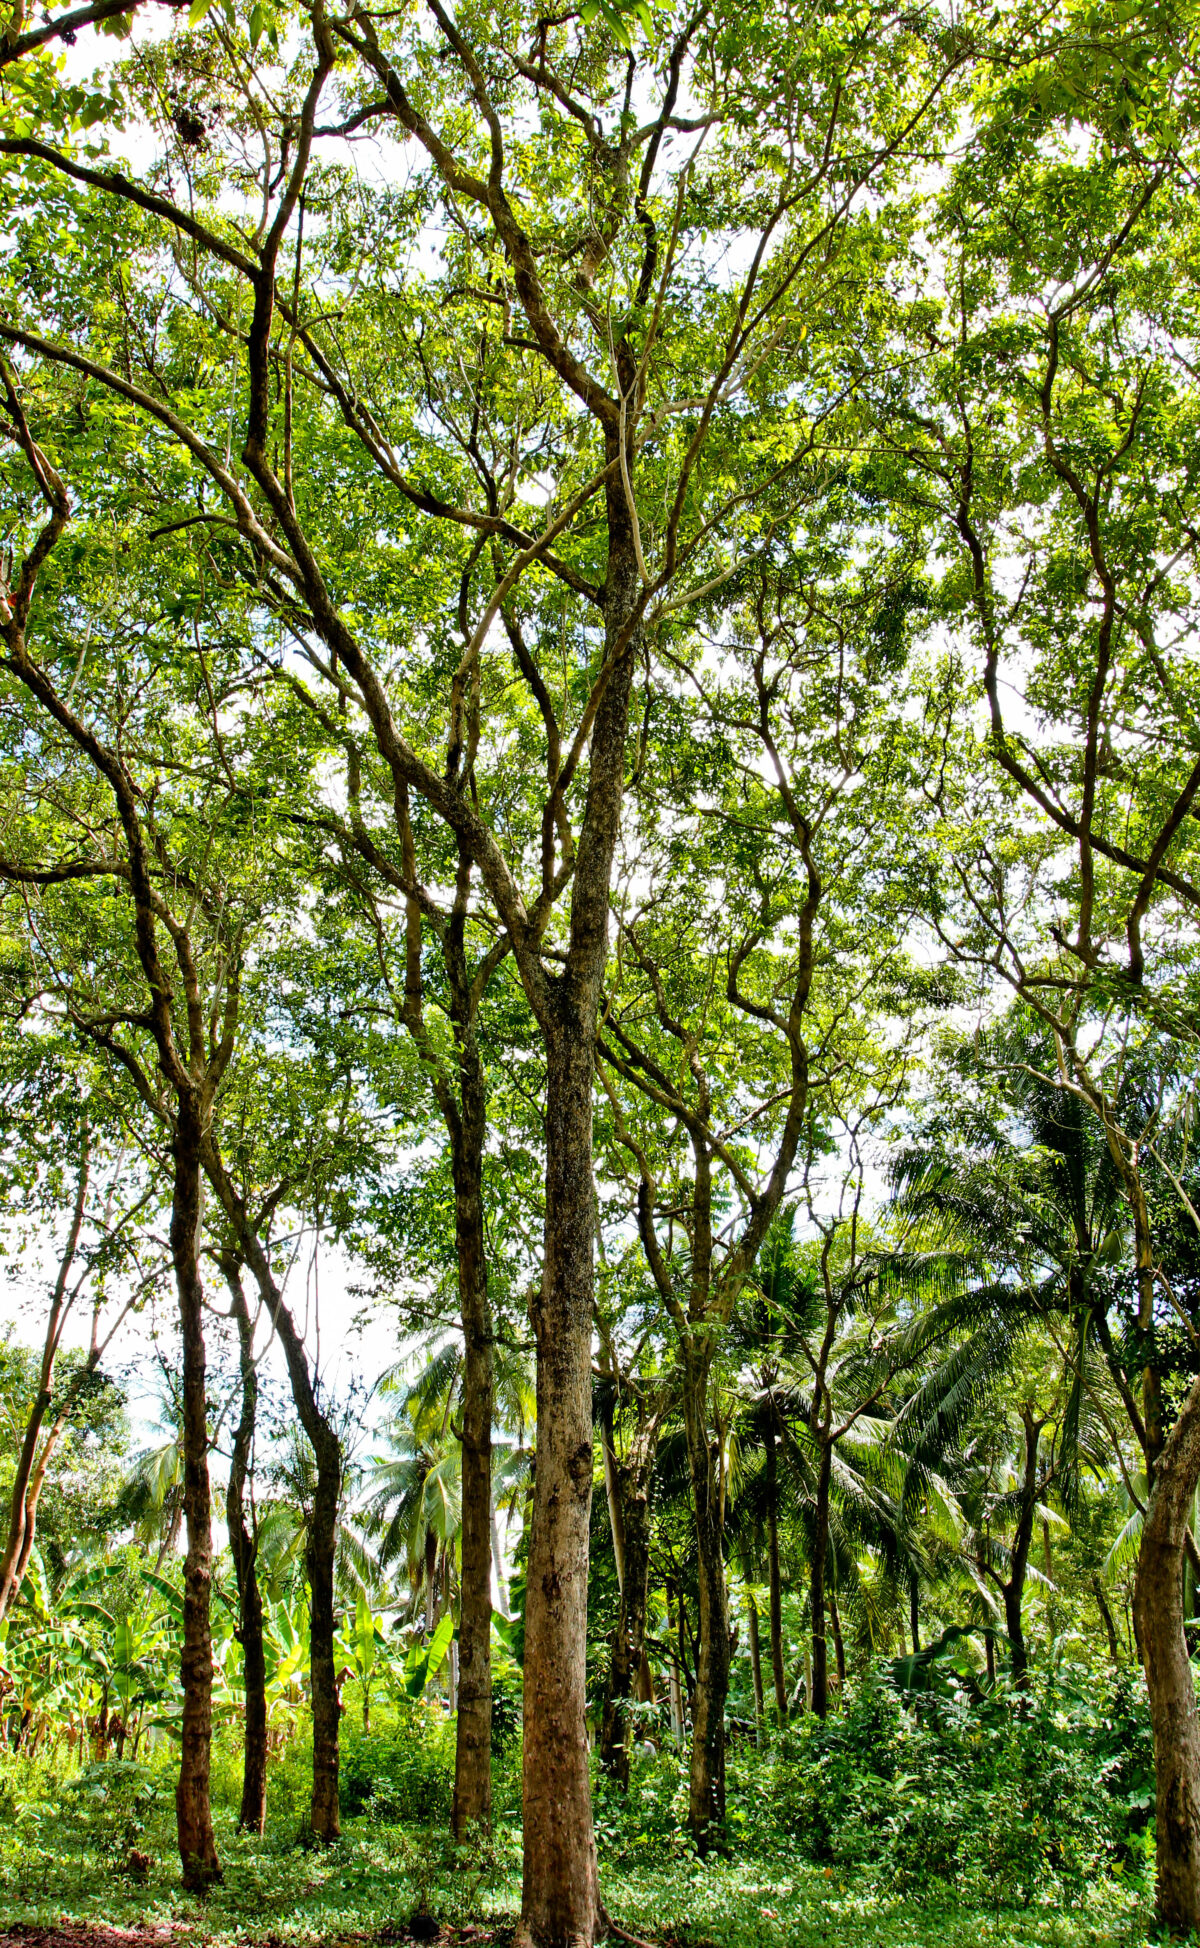 philippine trees names and pictures